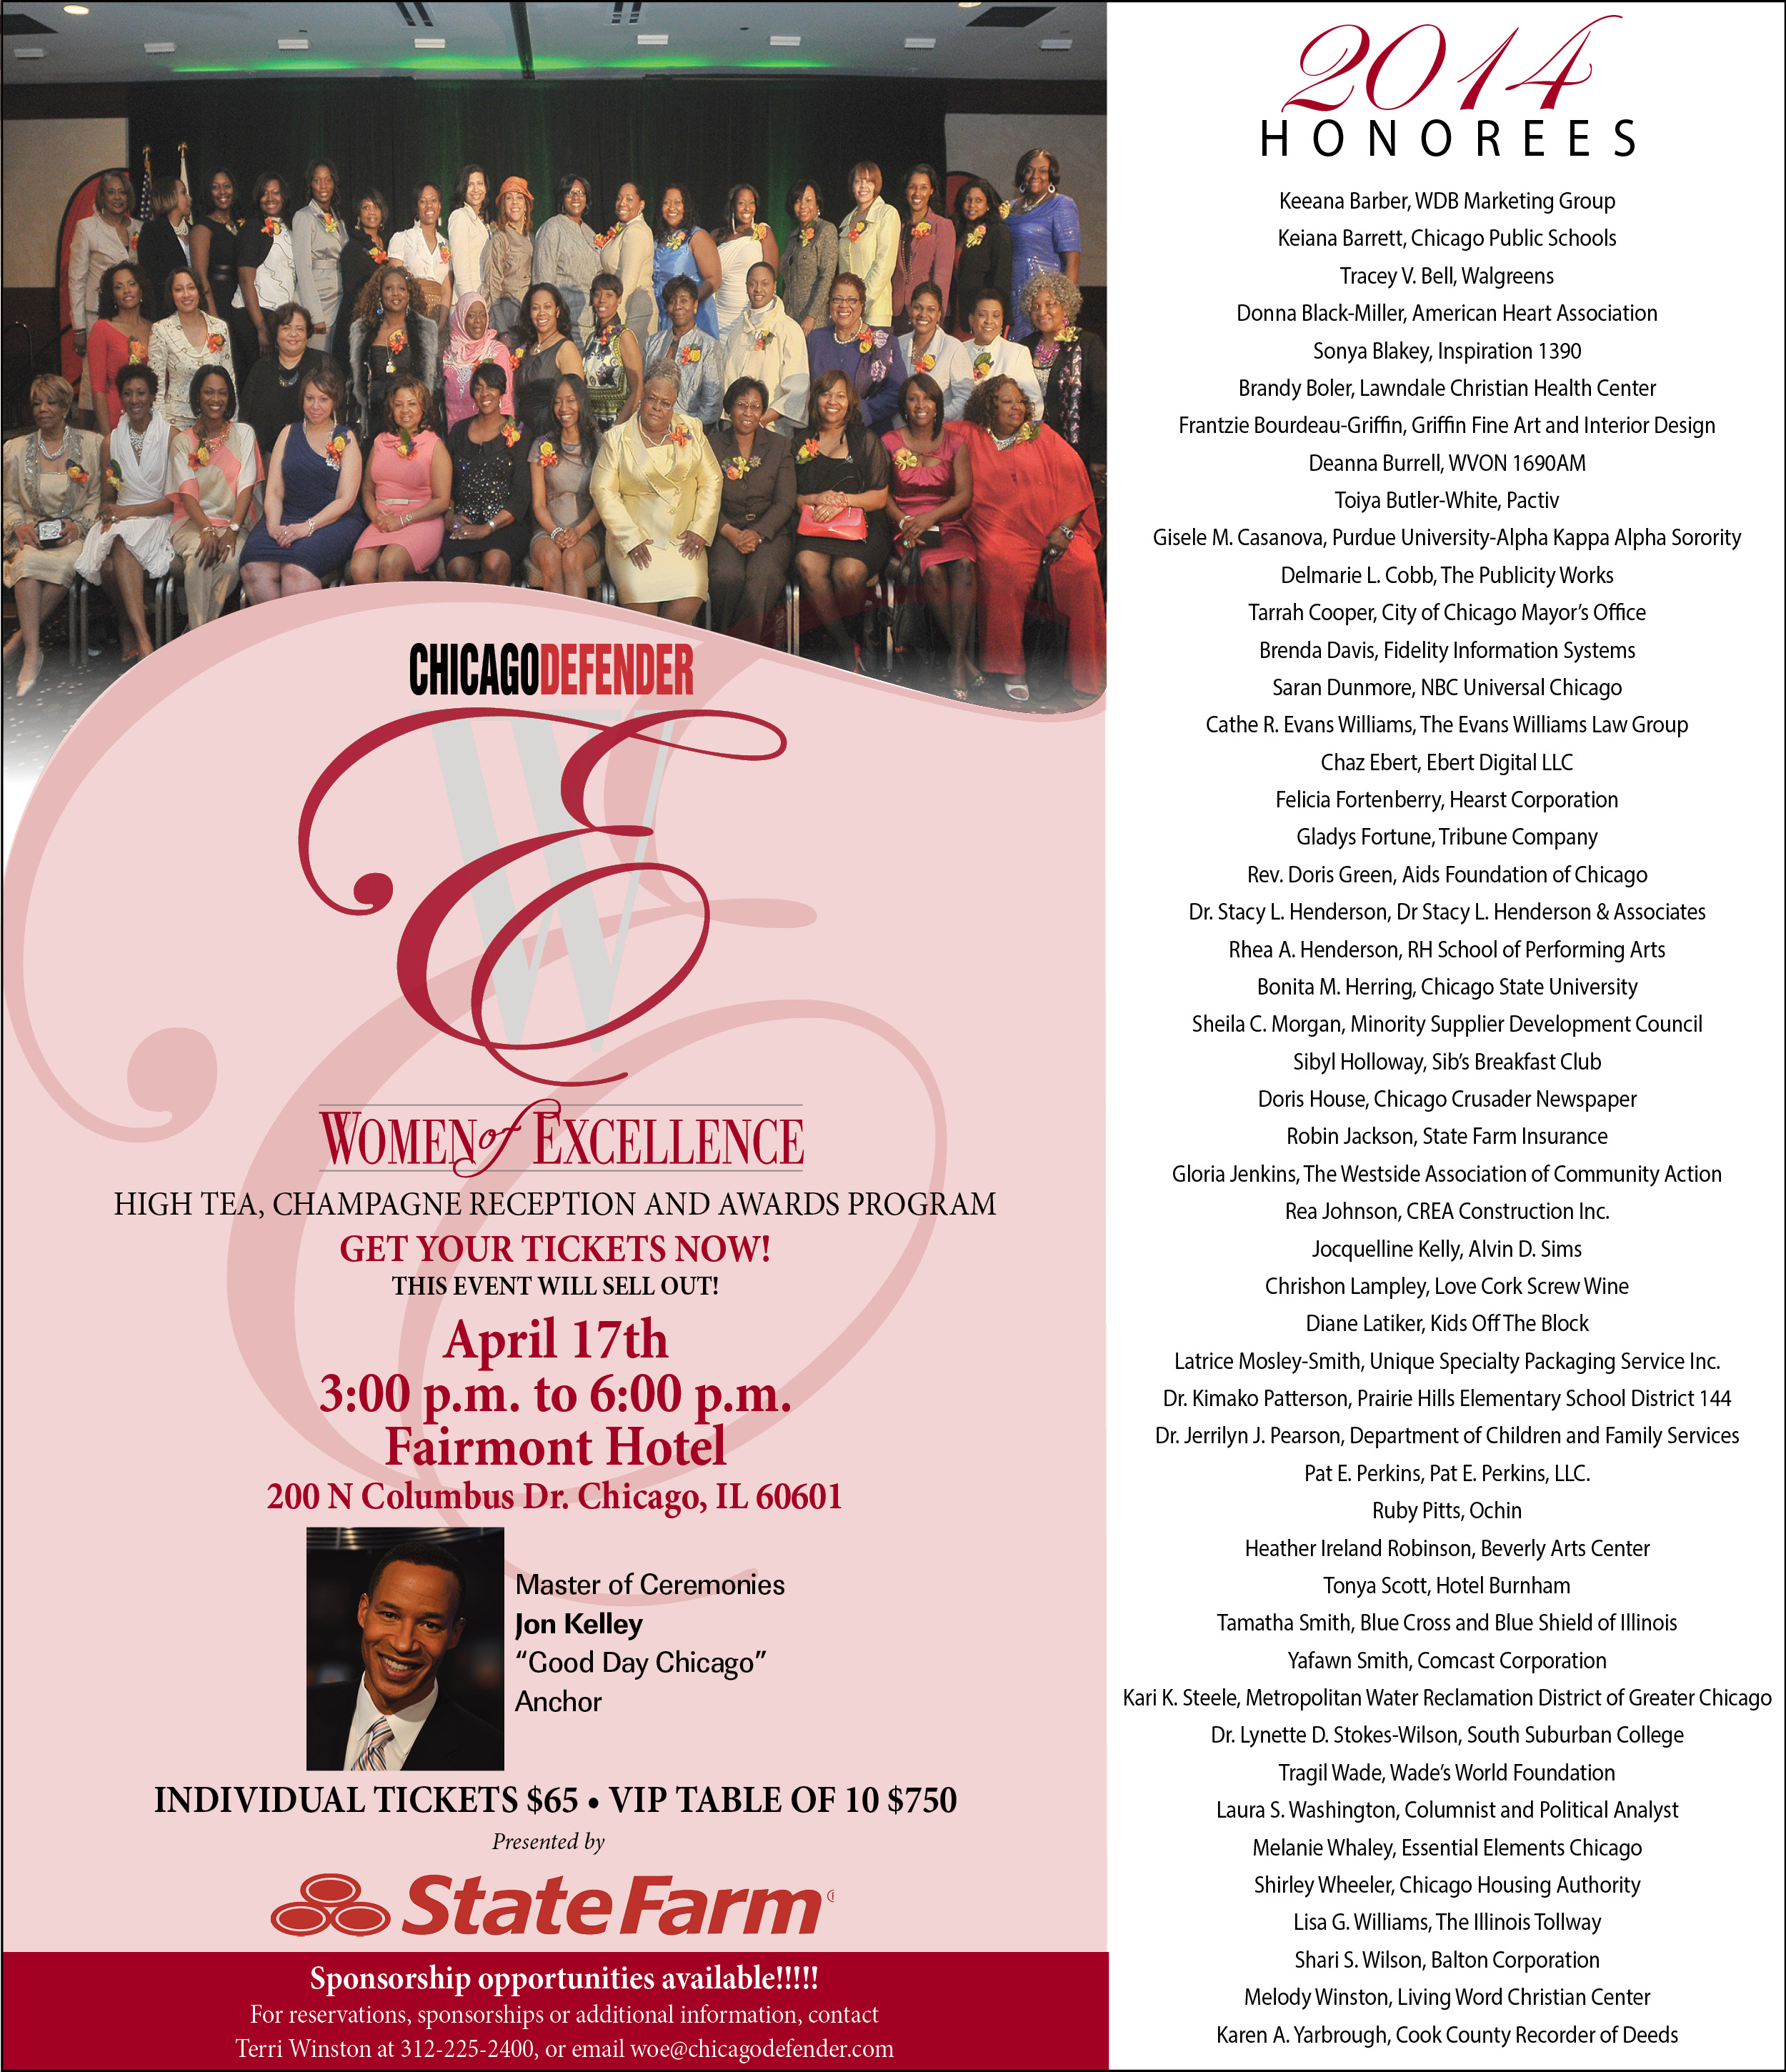 Chicago Defender Women of Excellence 2014 honorees | Chicago Defender